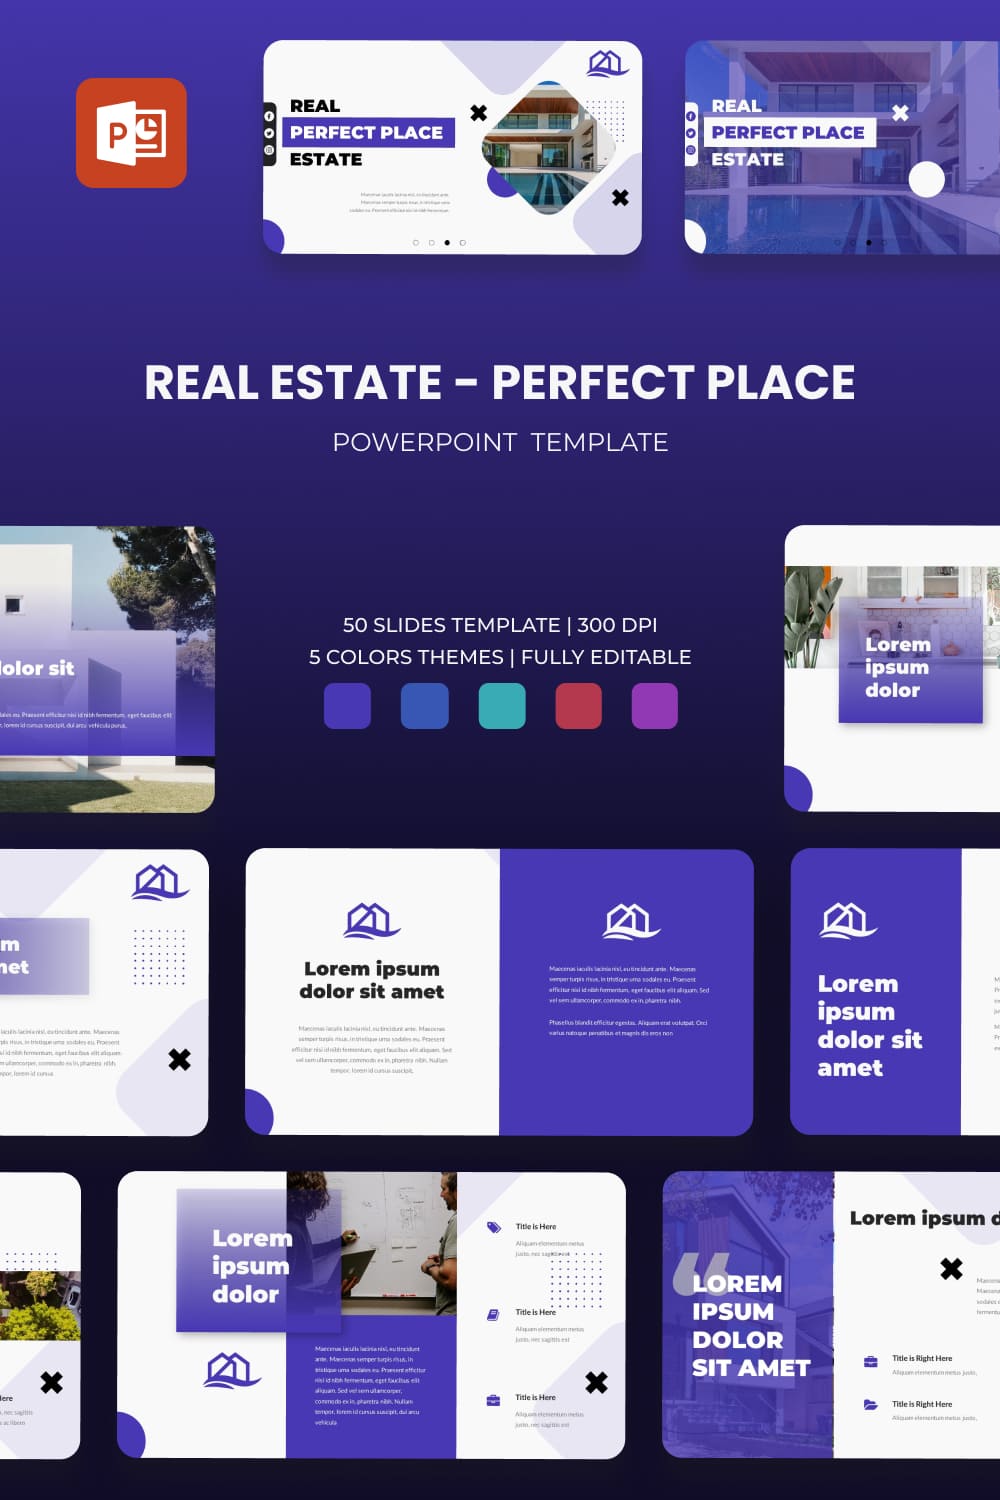 Perfect Place Real Estate Powerpoint Template.